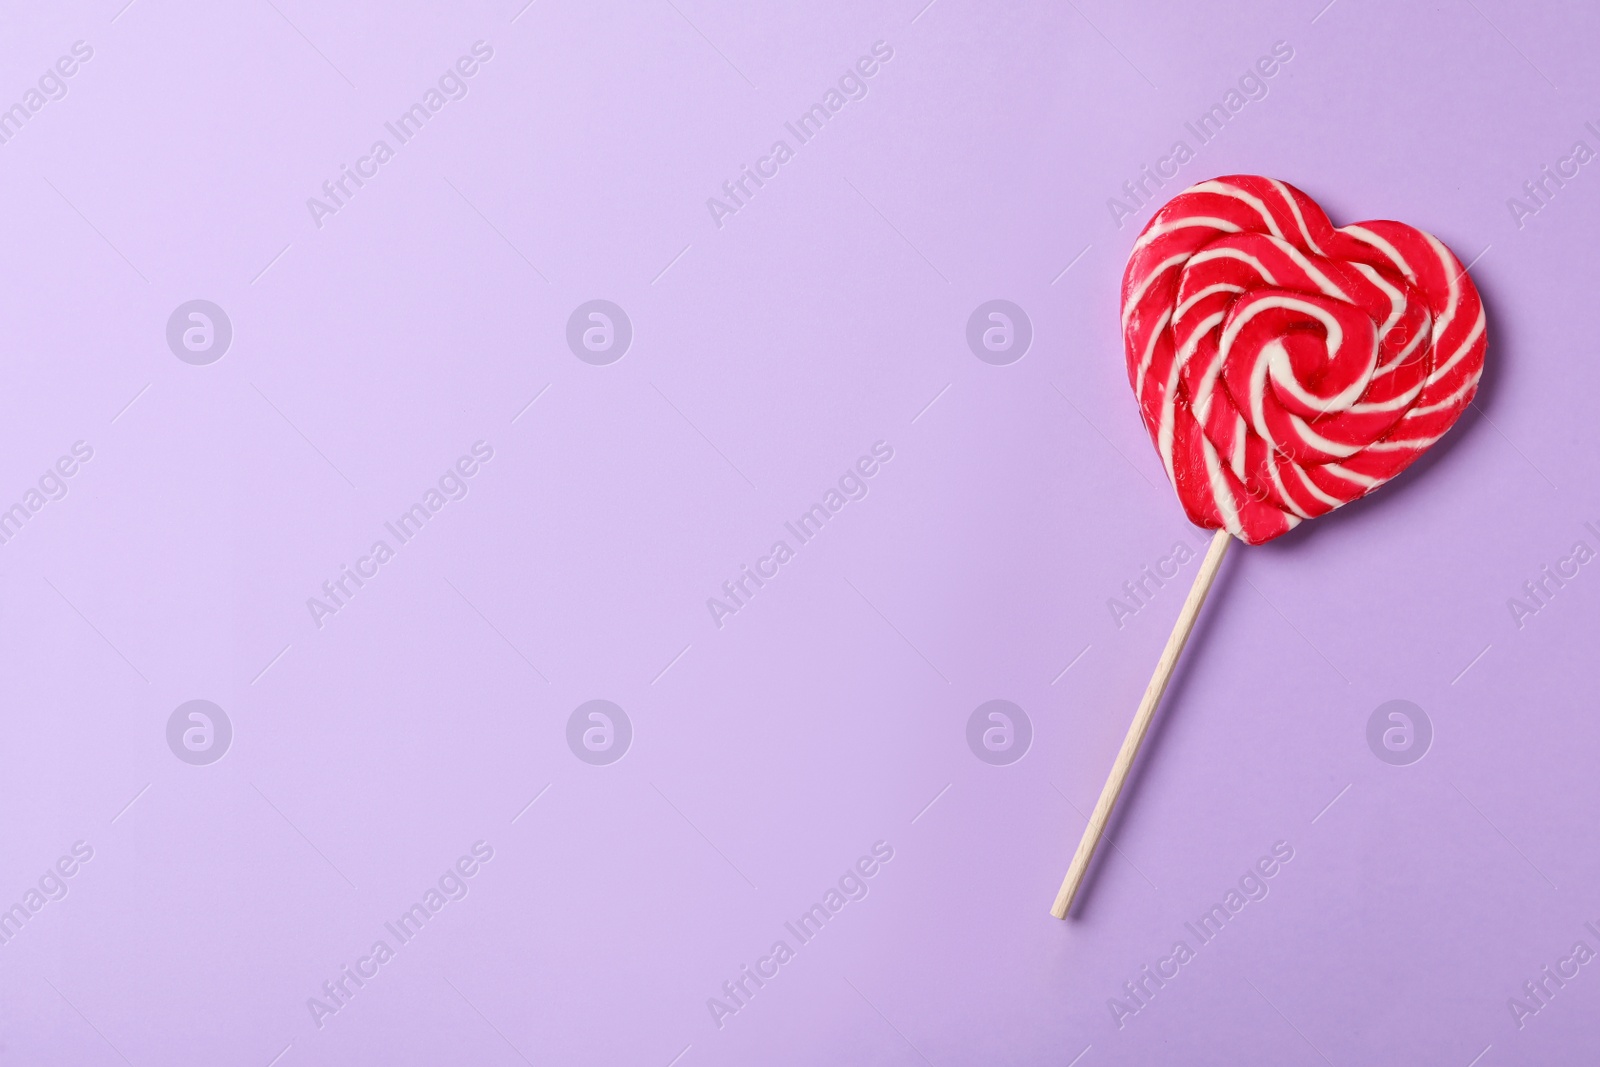 Photo of Sweet heart shaped lollipop on violet background, top view with space for text. Valentine's day celebration